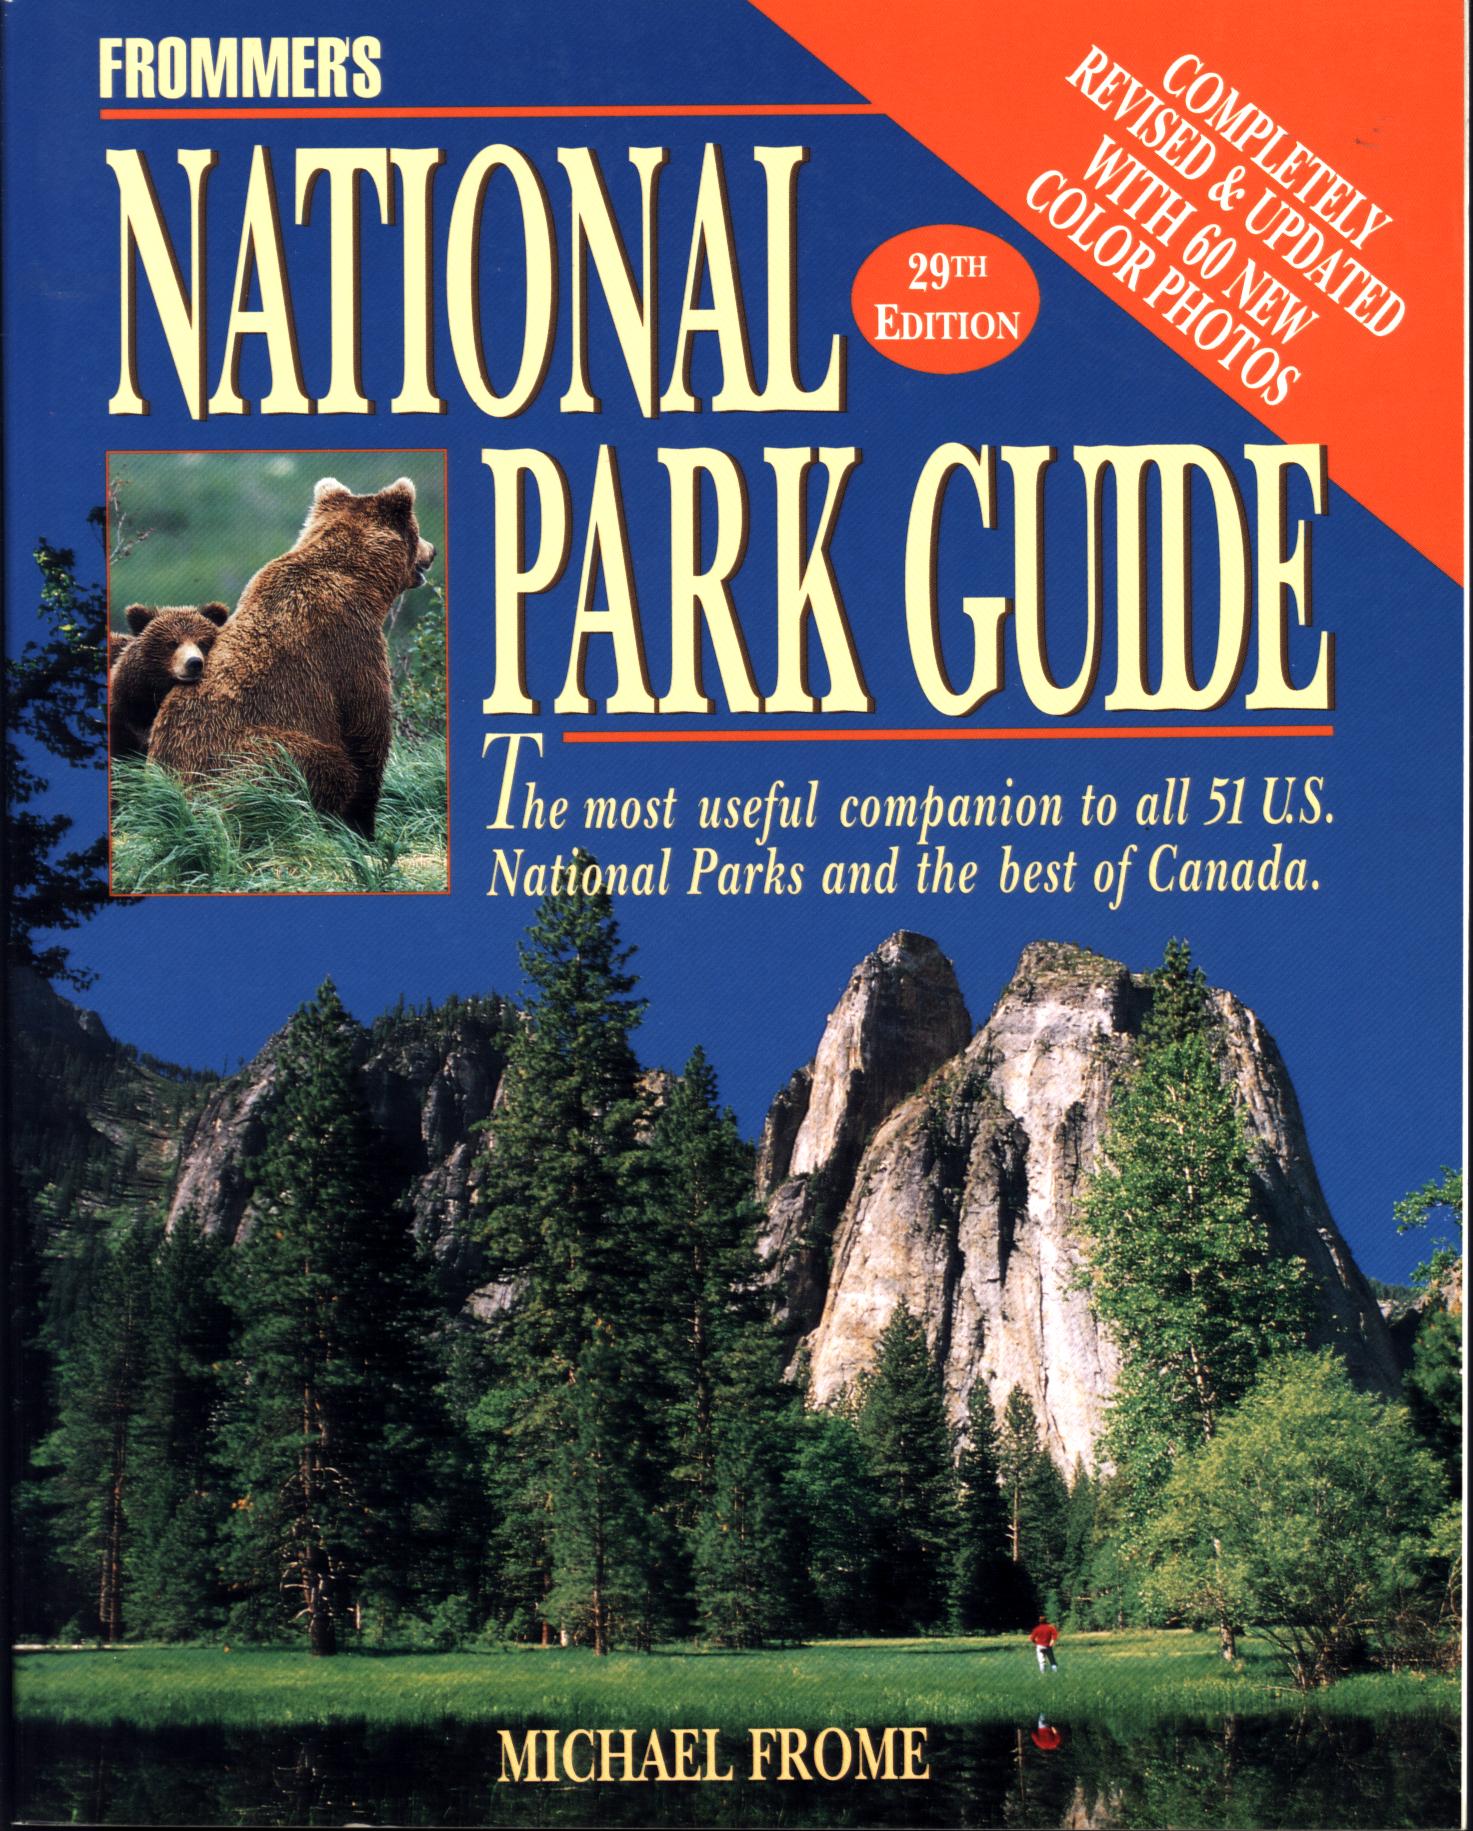 AAA GUIDE TO THE NATIONAL PARKS. 